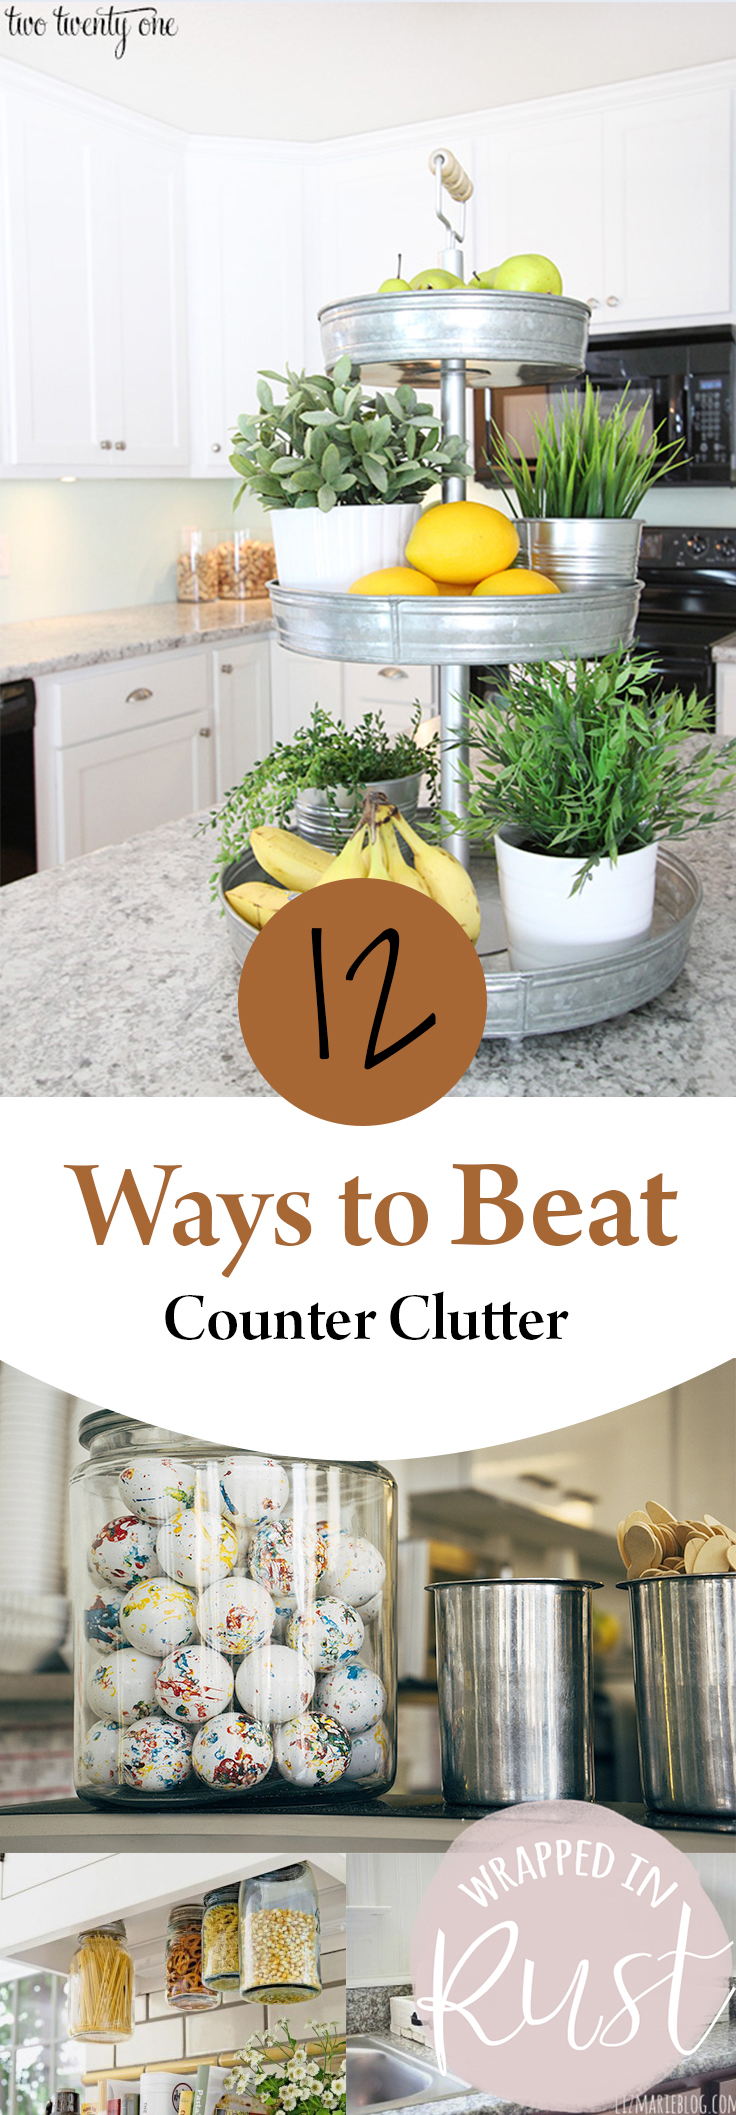 12 Ways to Beat Counter Clutter-Clutter Free Living, Clutter Free Home, Clean Your Home, Organize Your Kitchen, How to Organize Your Counter Tops, Clean Your Countertops, How to Clean Your Kitchen Countertops, Counter Clutter Solutions